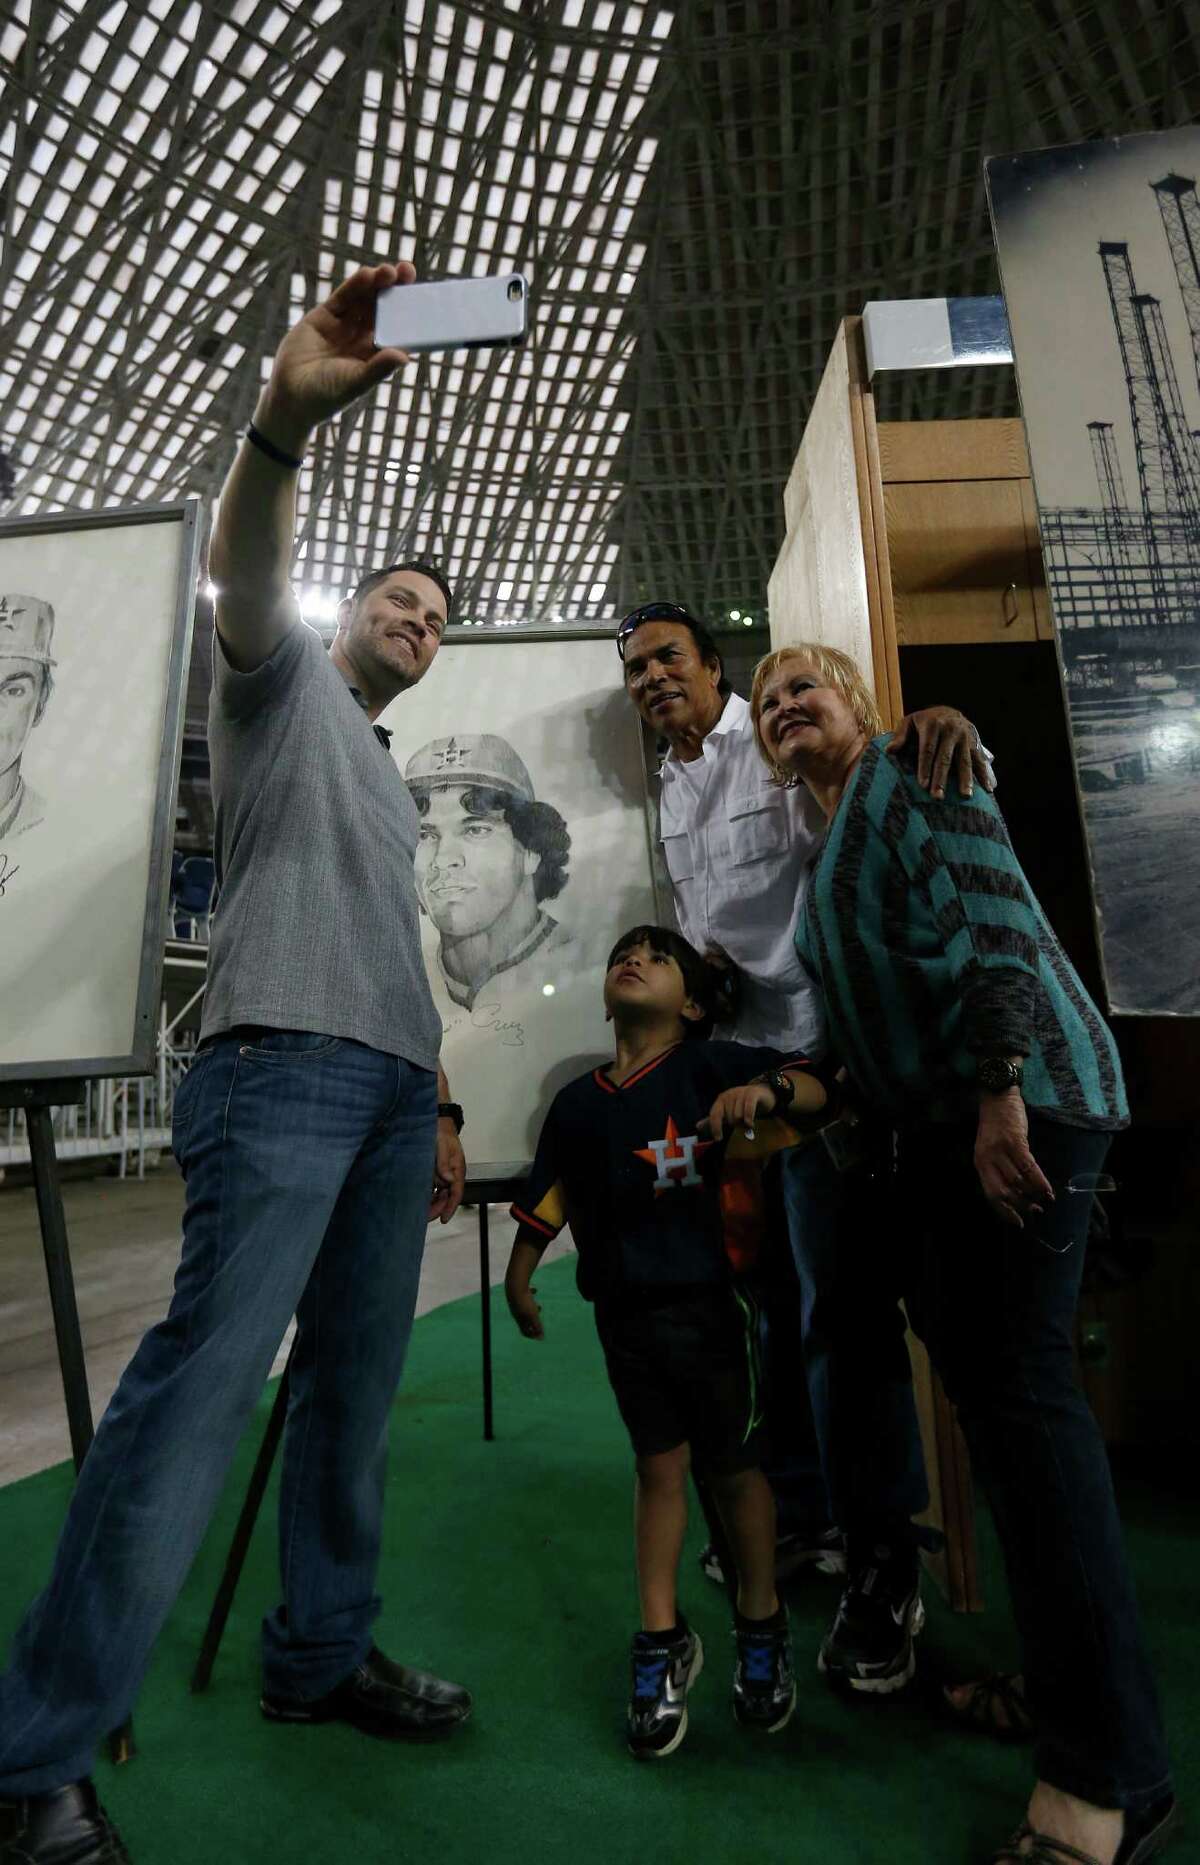 Jose Cruz and his family, Enrique Cruz, wife Zoraida and grandson Diego Macias take photos with a drawing of Jose inside of the Astrodome during the 50th anniversary of the first Opening Day in the Astrodome, on Thursday, April 9, 2015, in Houston.